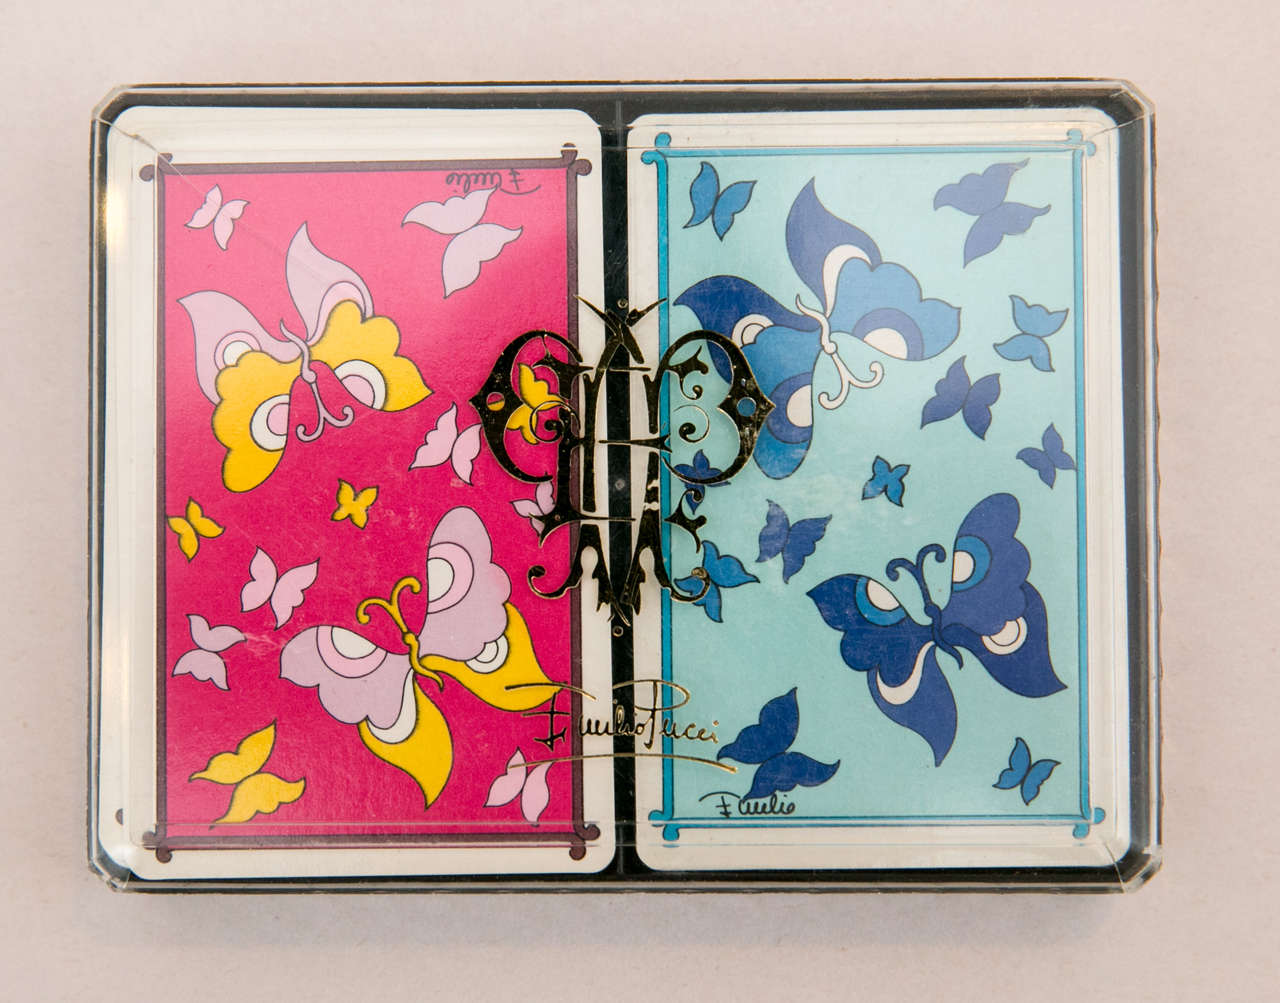 Late 20th Century 2 decks of emilio pucci playing cards in box presented by funky finders